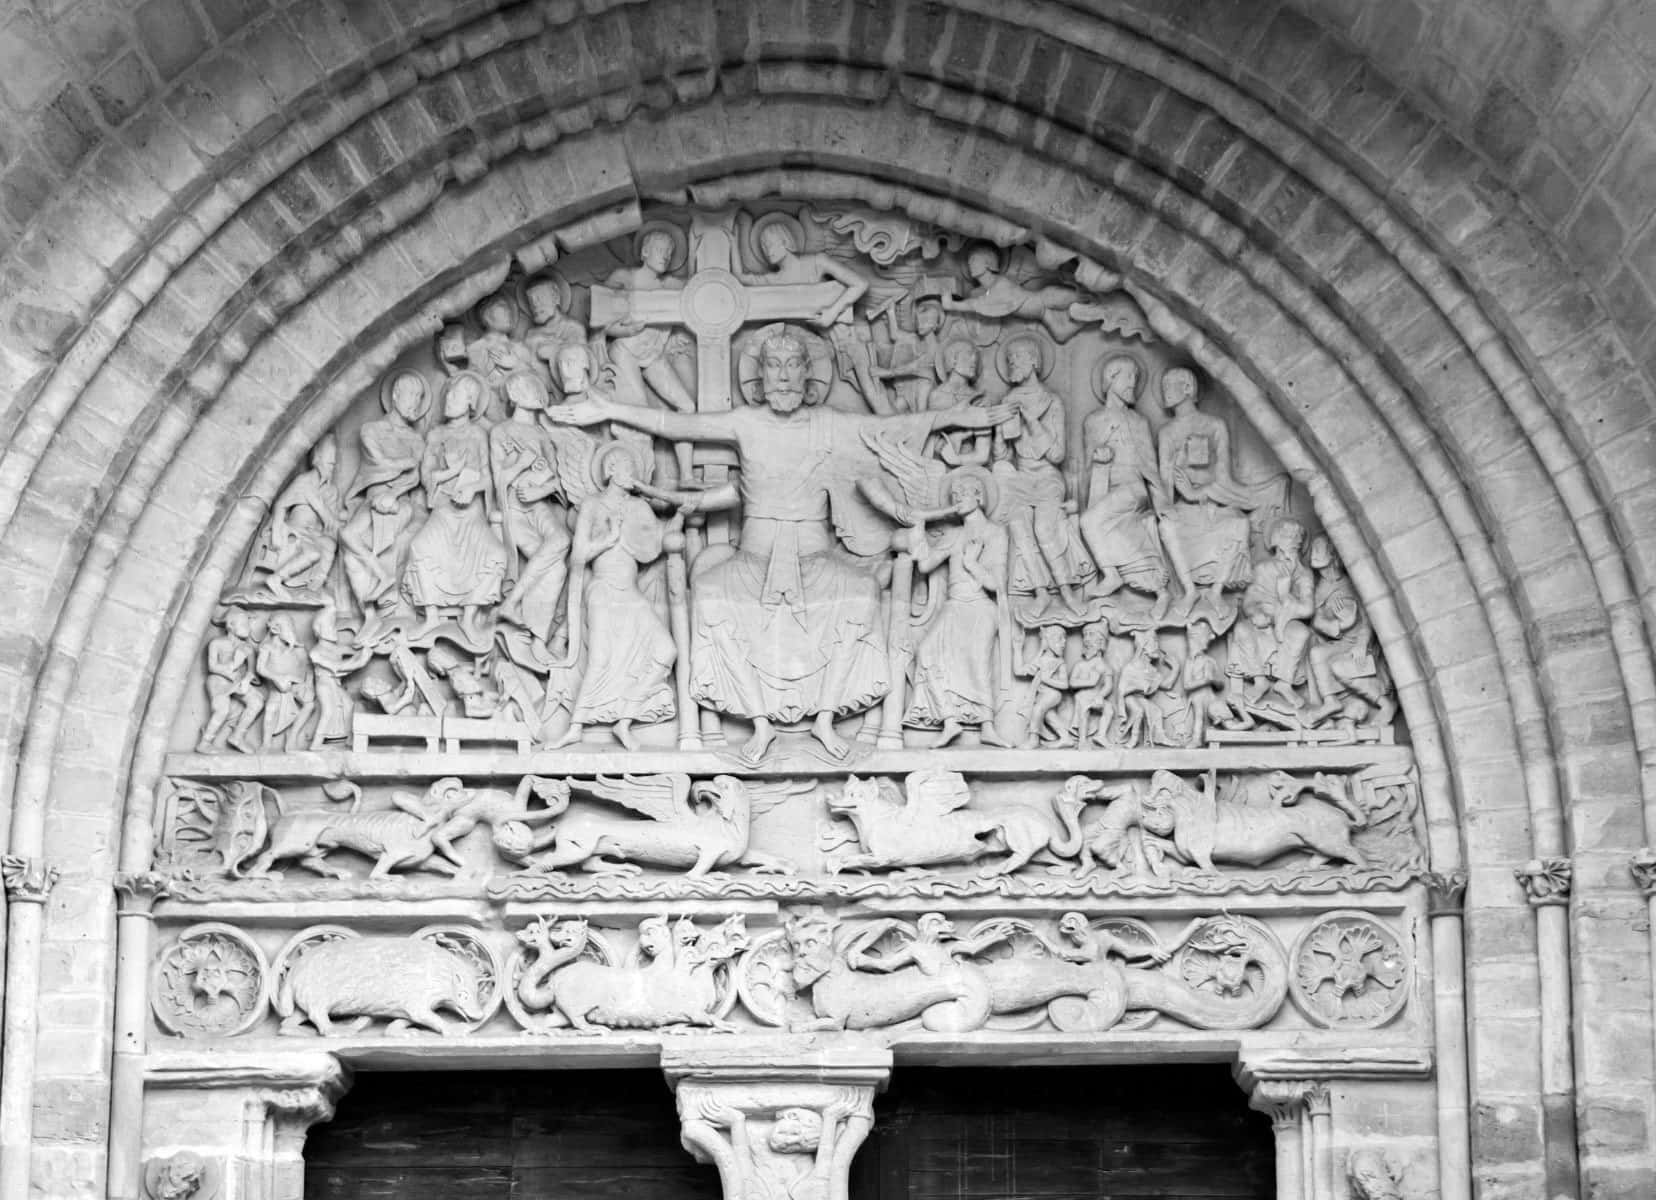 sone carving of christ and 12 apostles above the door of the Abbaye Saint Pierre in Beaulieu sur Dordogne 